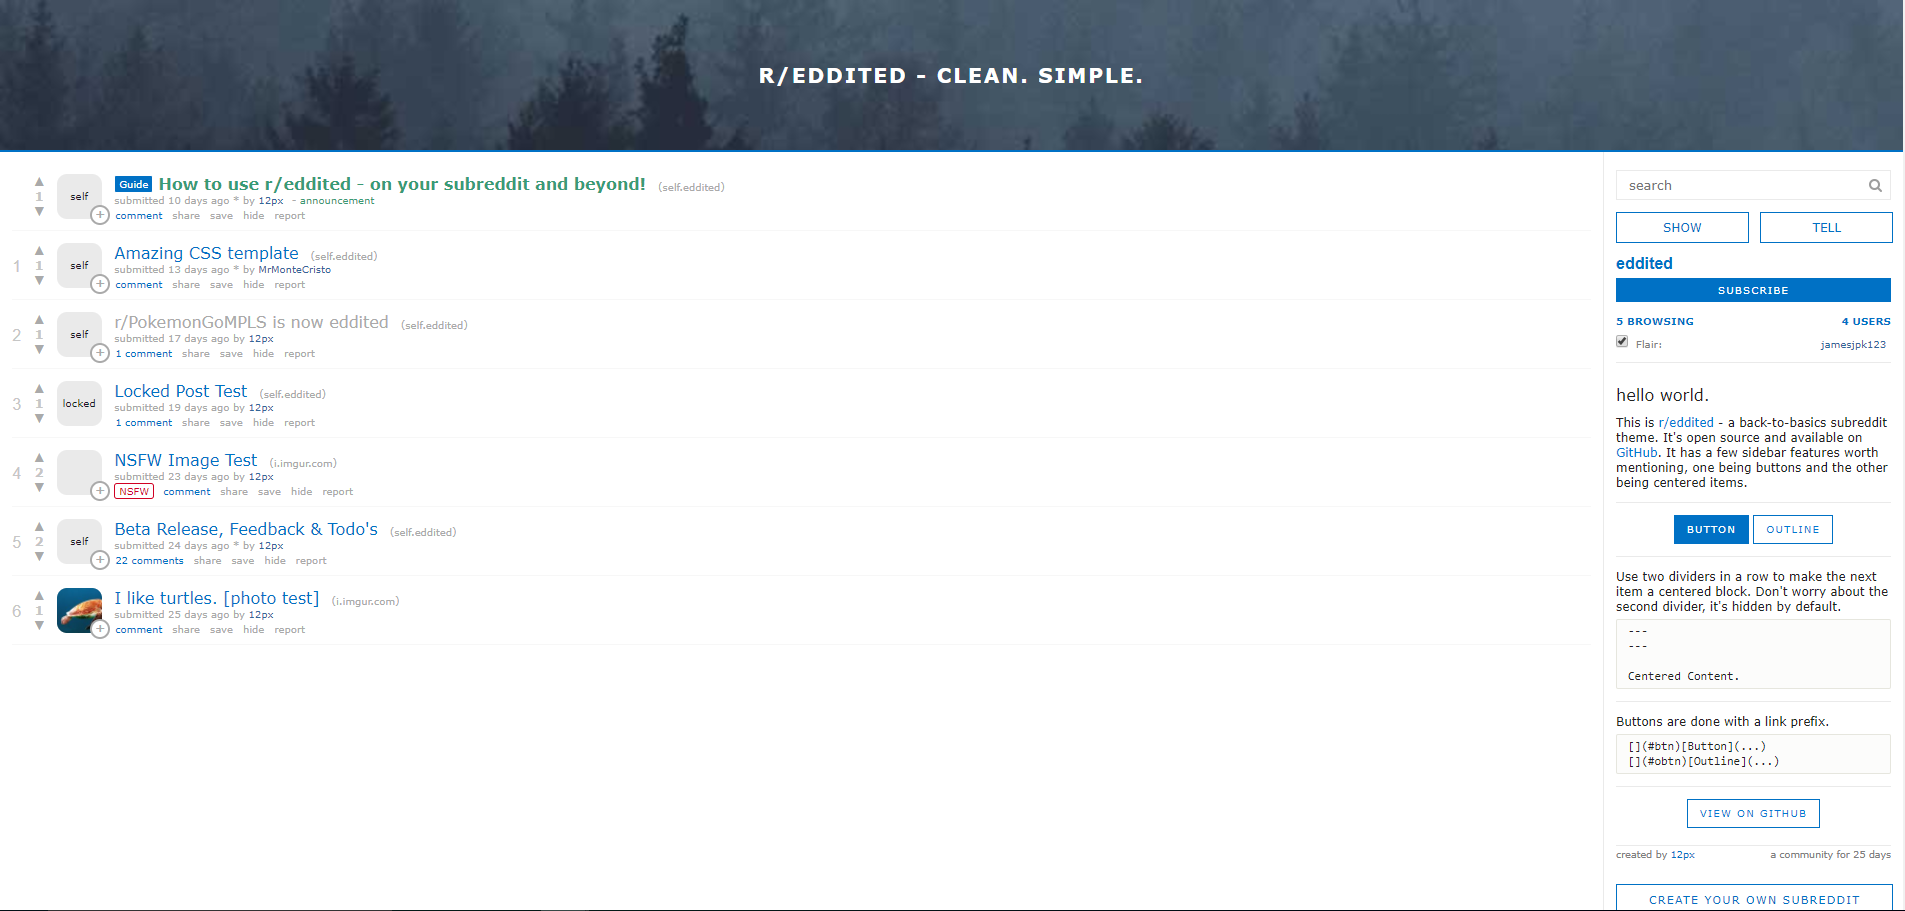 Picture showing screenshot of Eddited Theme in action on a subreddit.